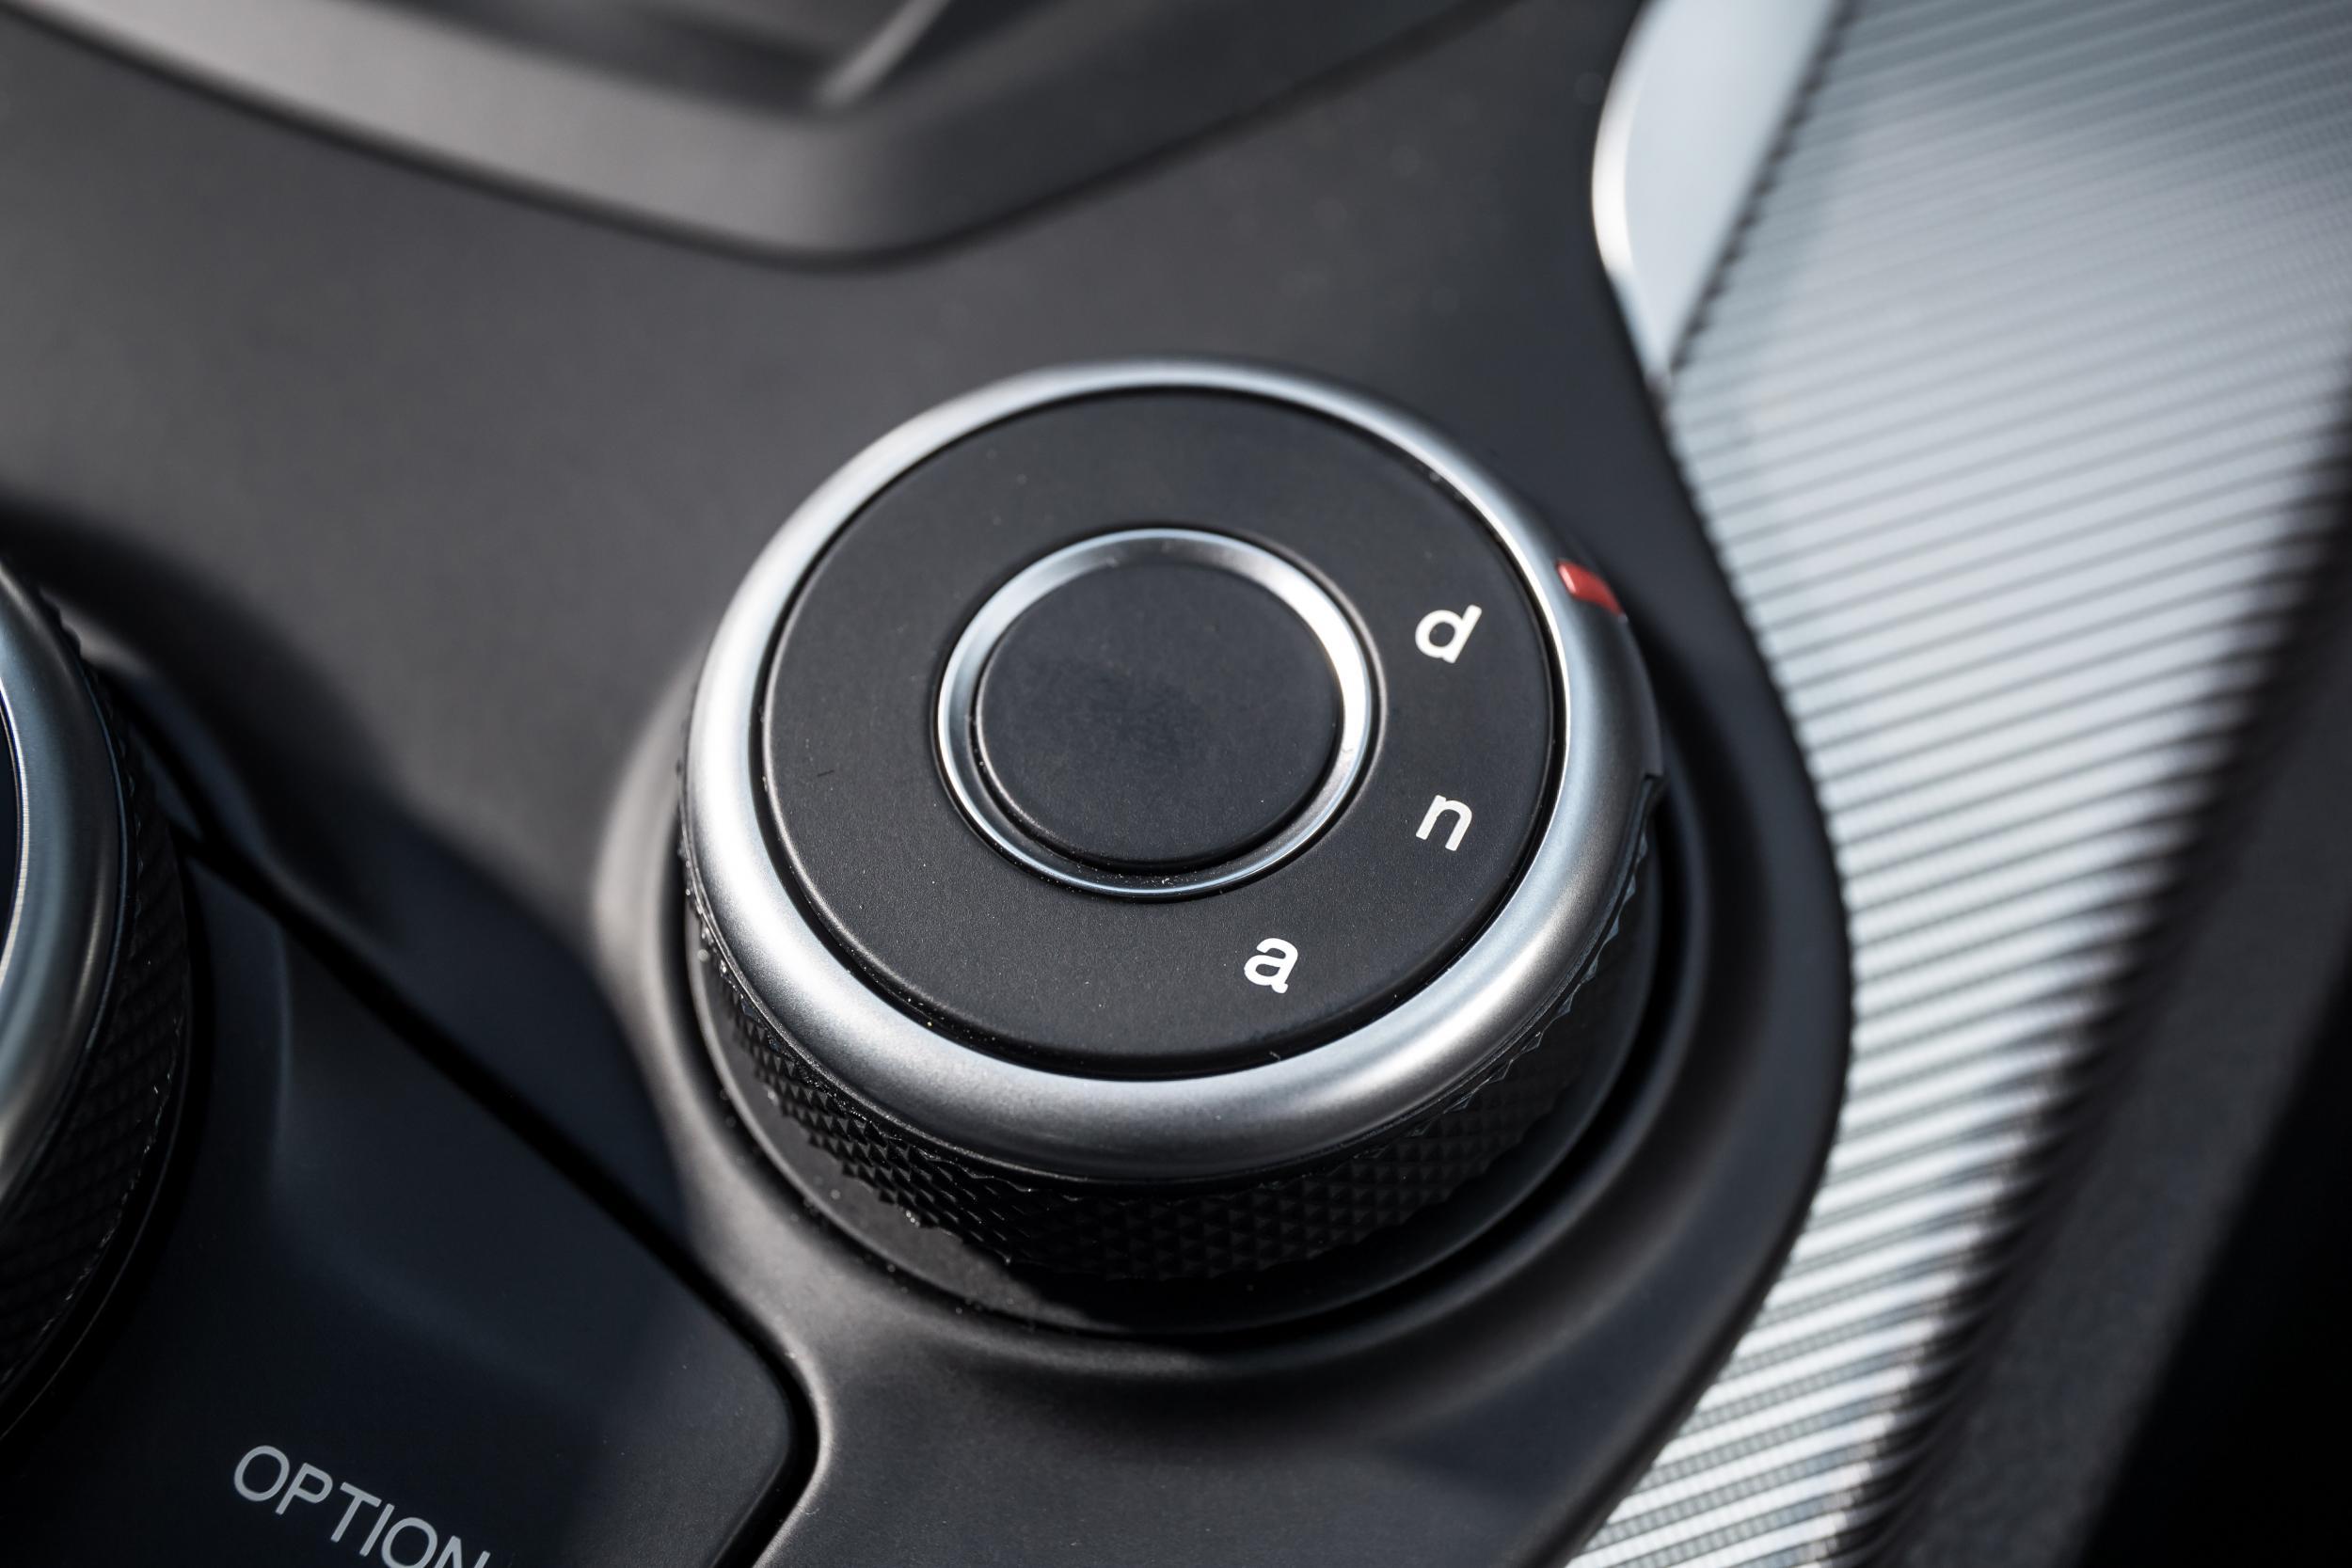 Drivers have the choice of three settings